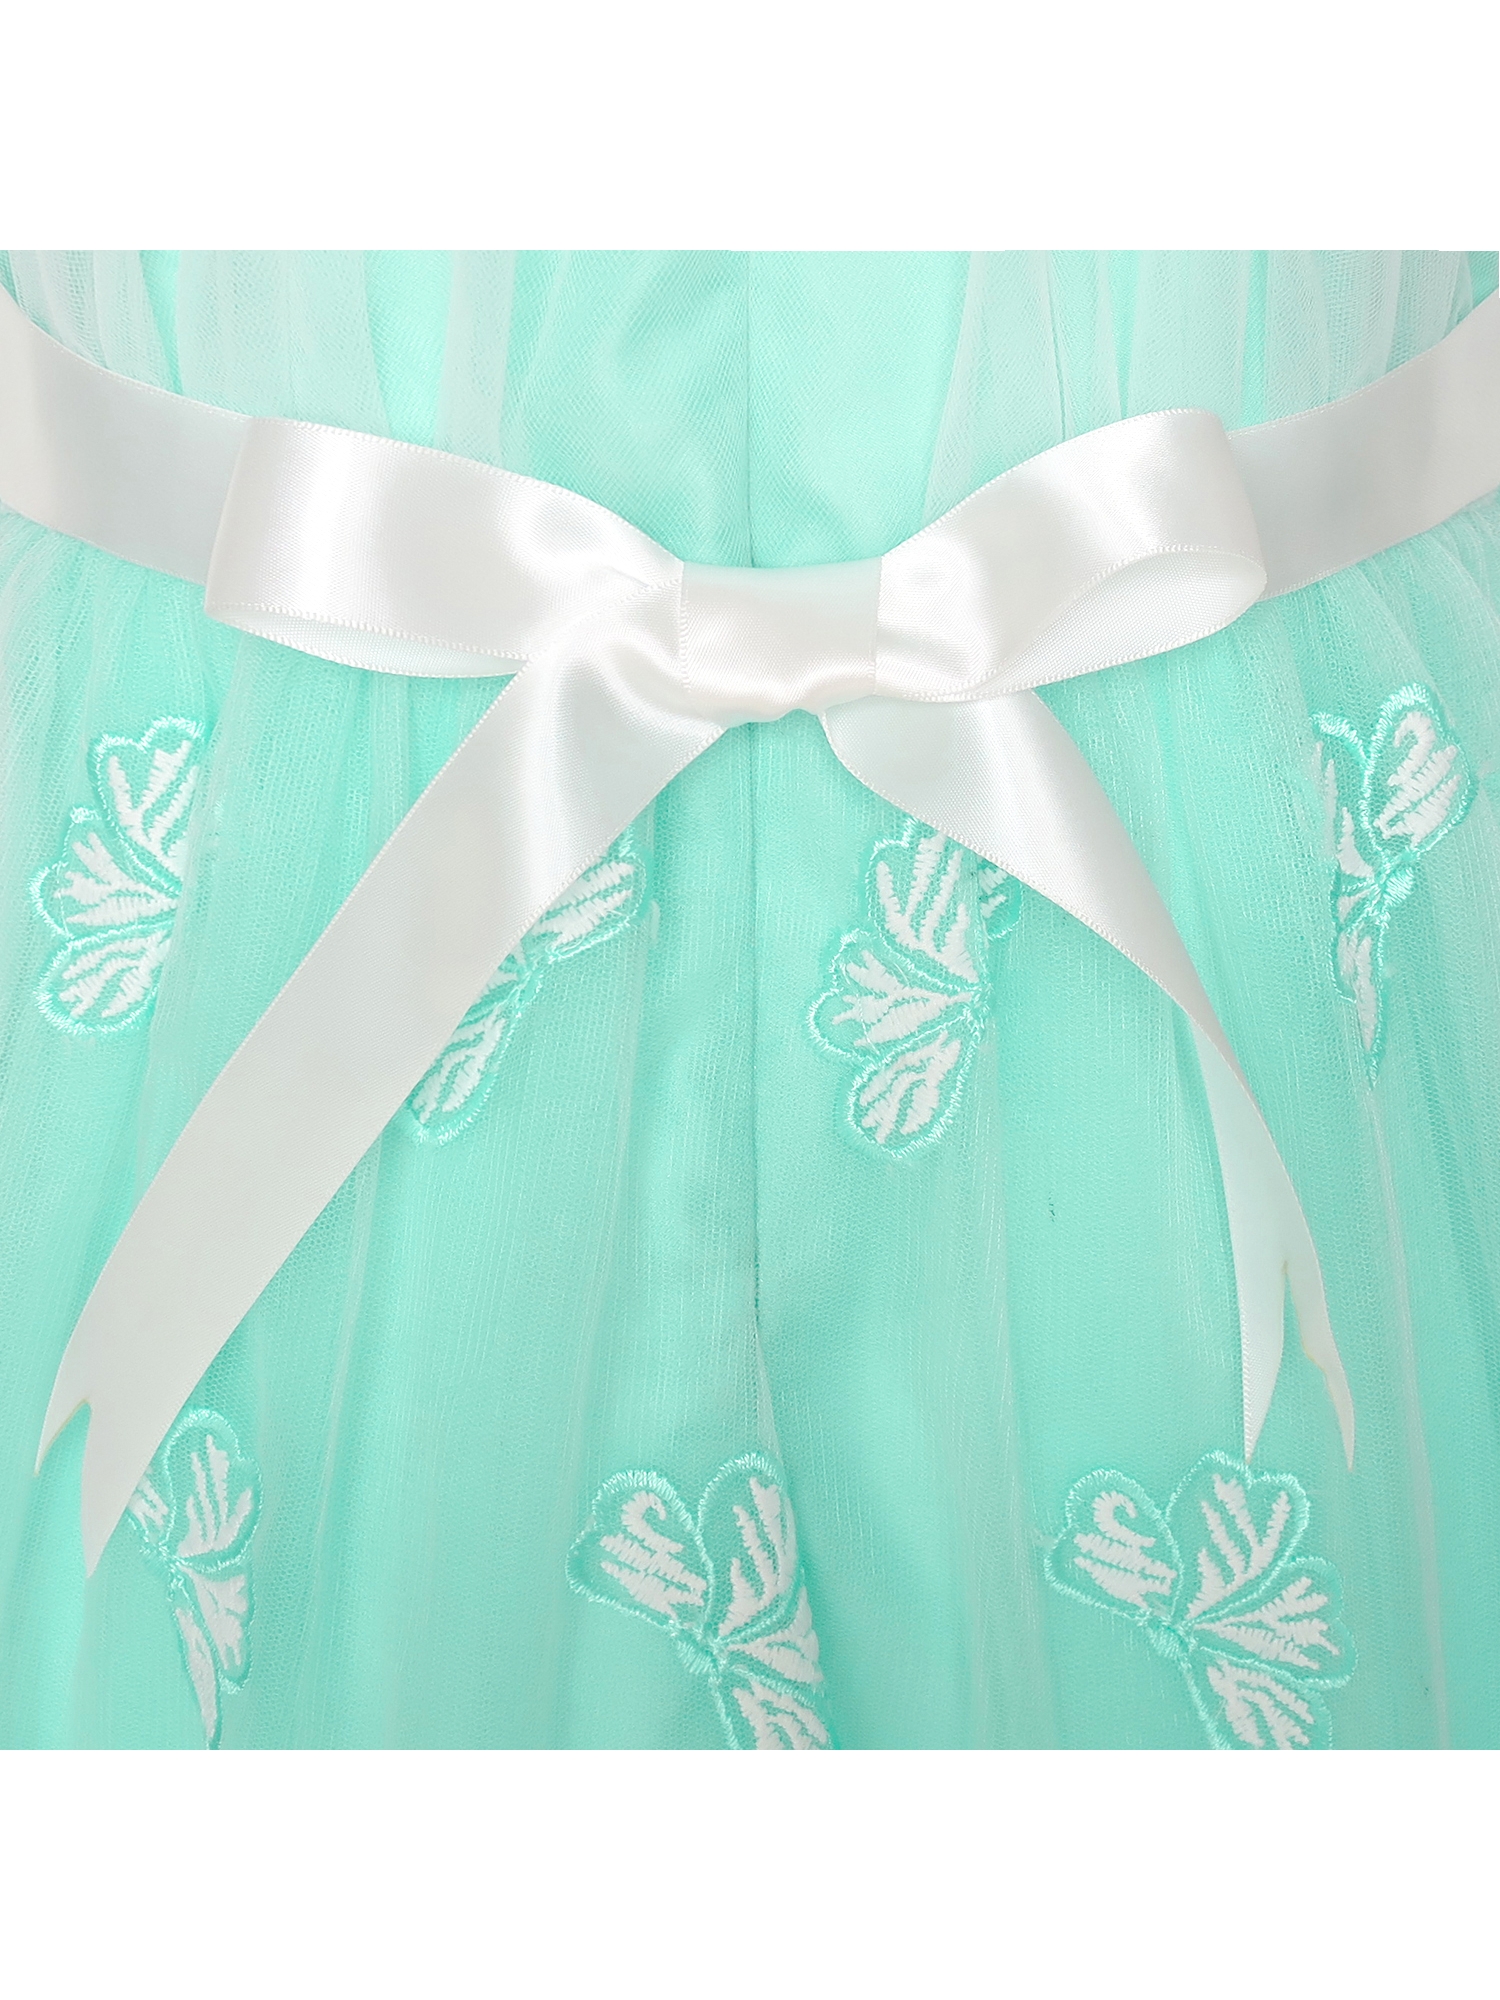 Girls Dress Turquoise Butterfly Embroidered Halter Dress Party 5 - image 5 of 7